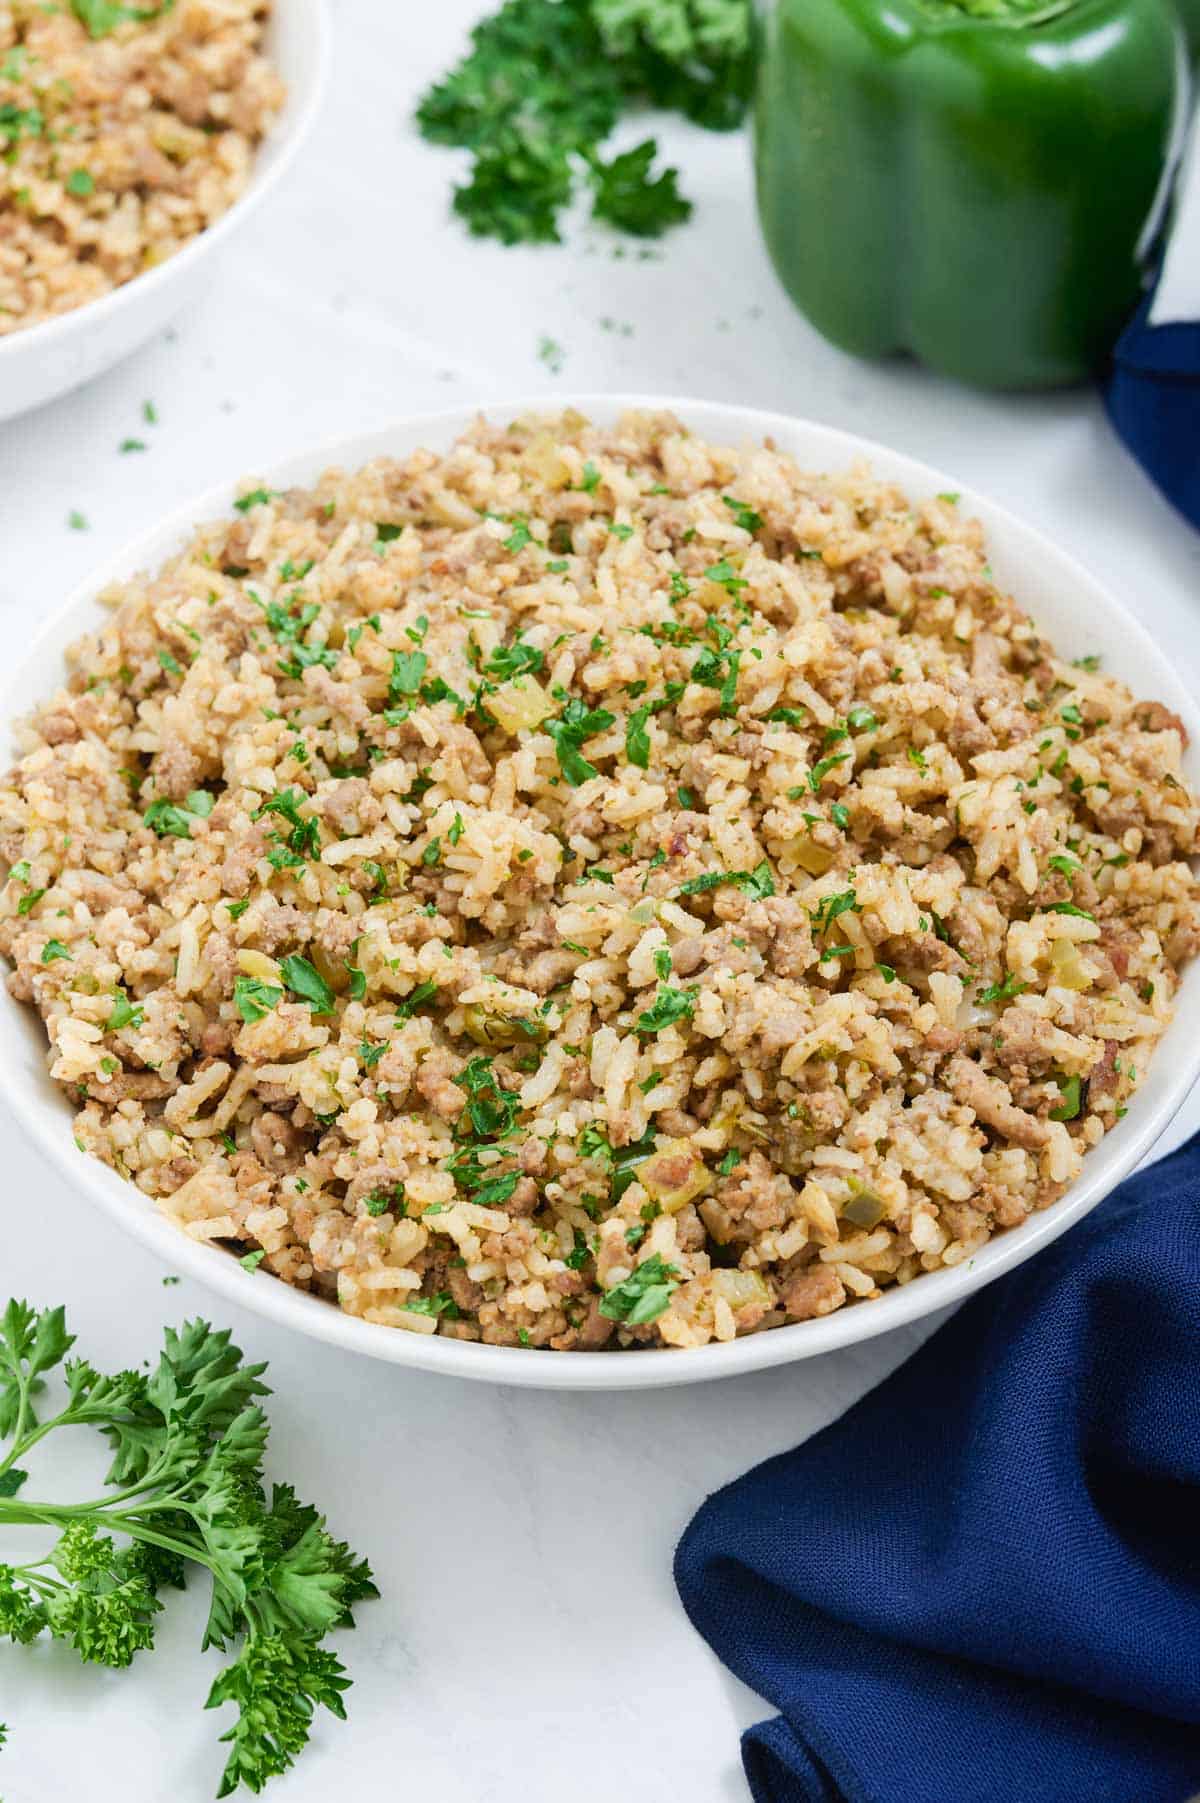 Dirty rice is a simple way to make a complete meal on the stove top.